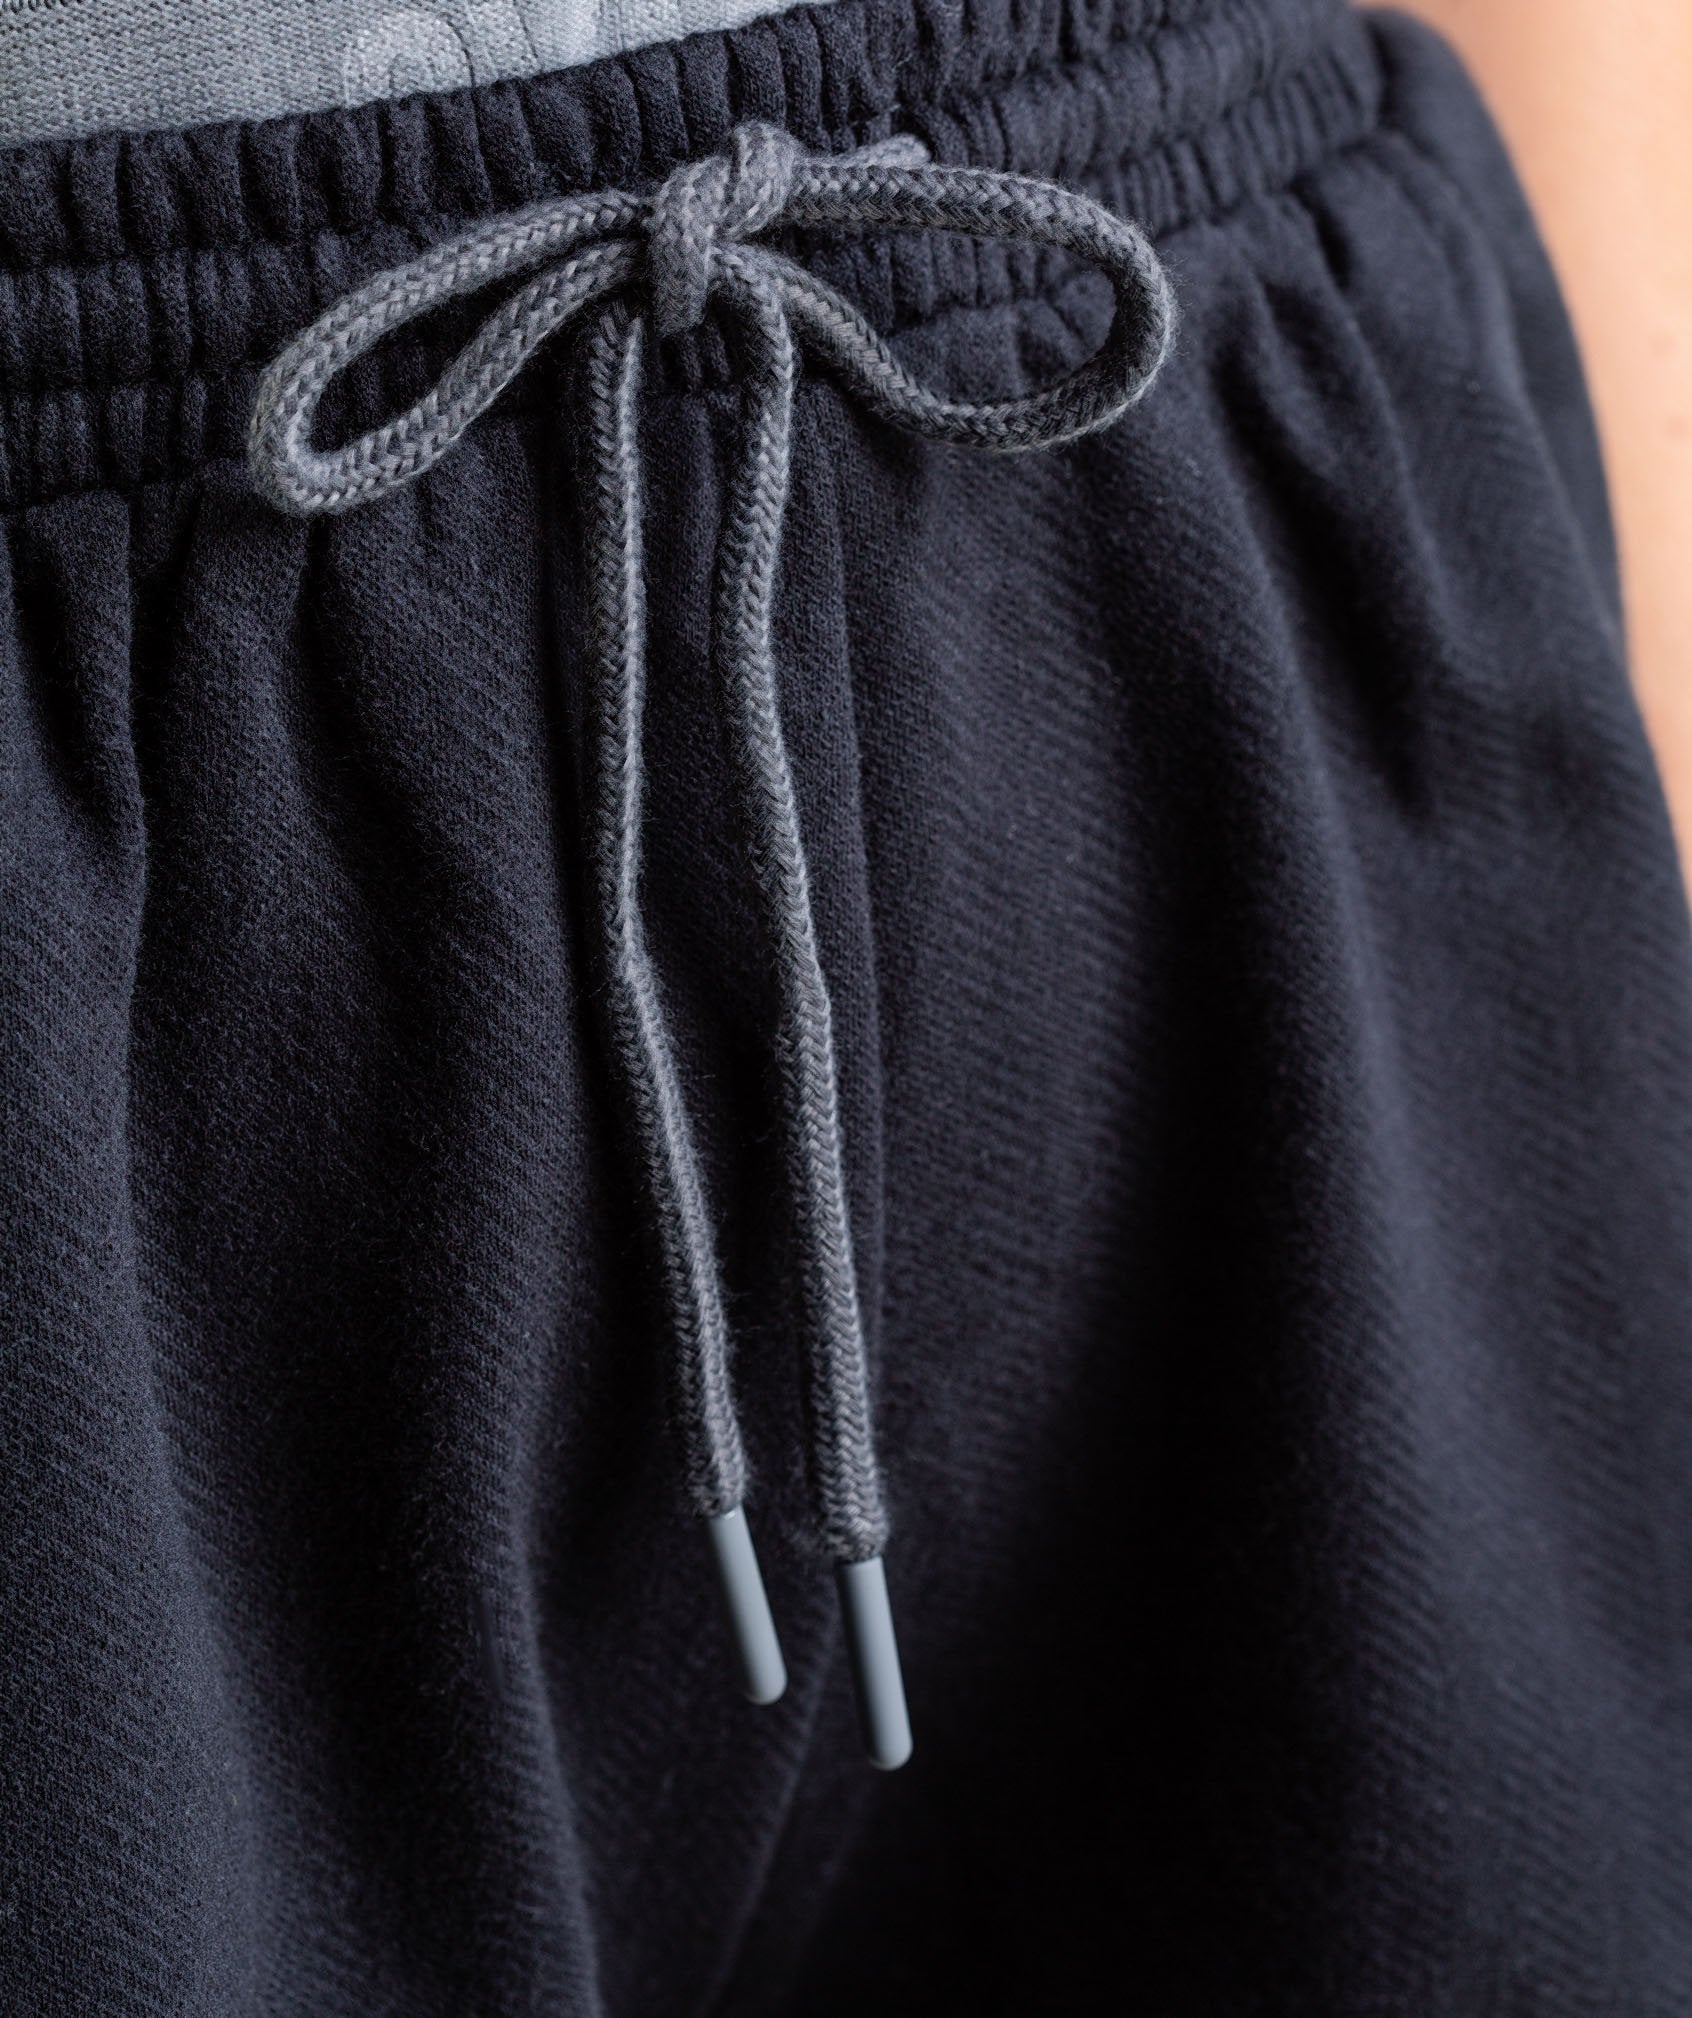 Heather Dual Band Shorts in Black - view 6